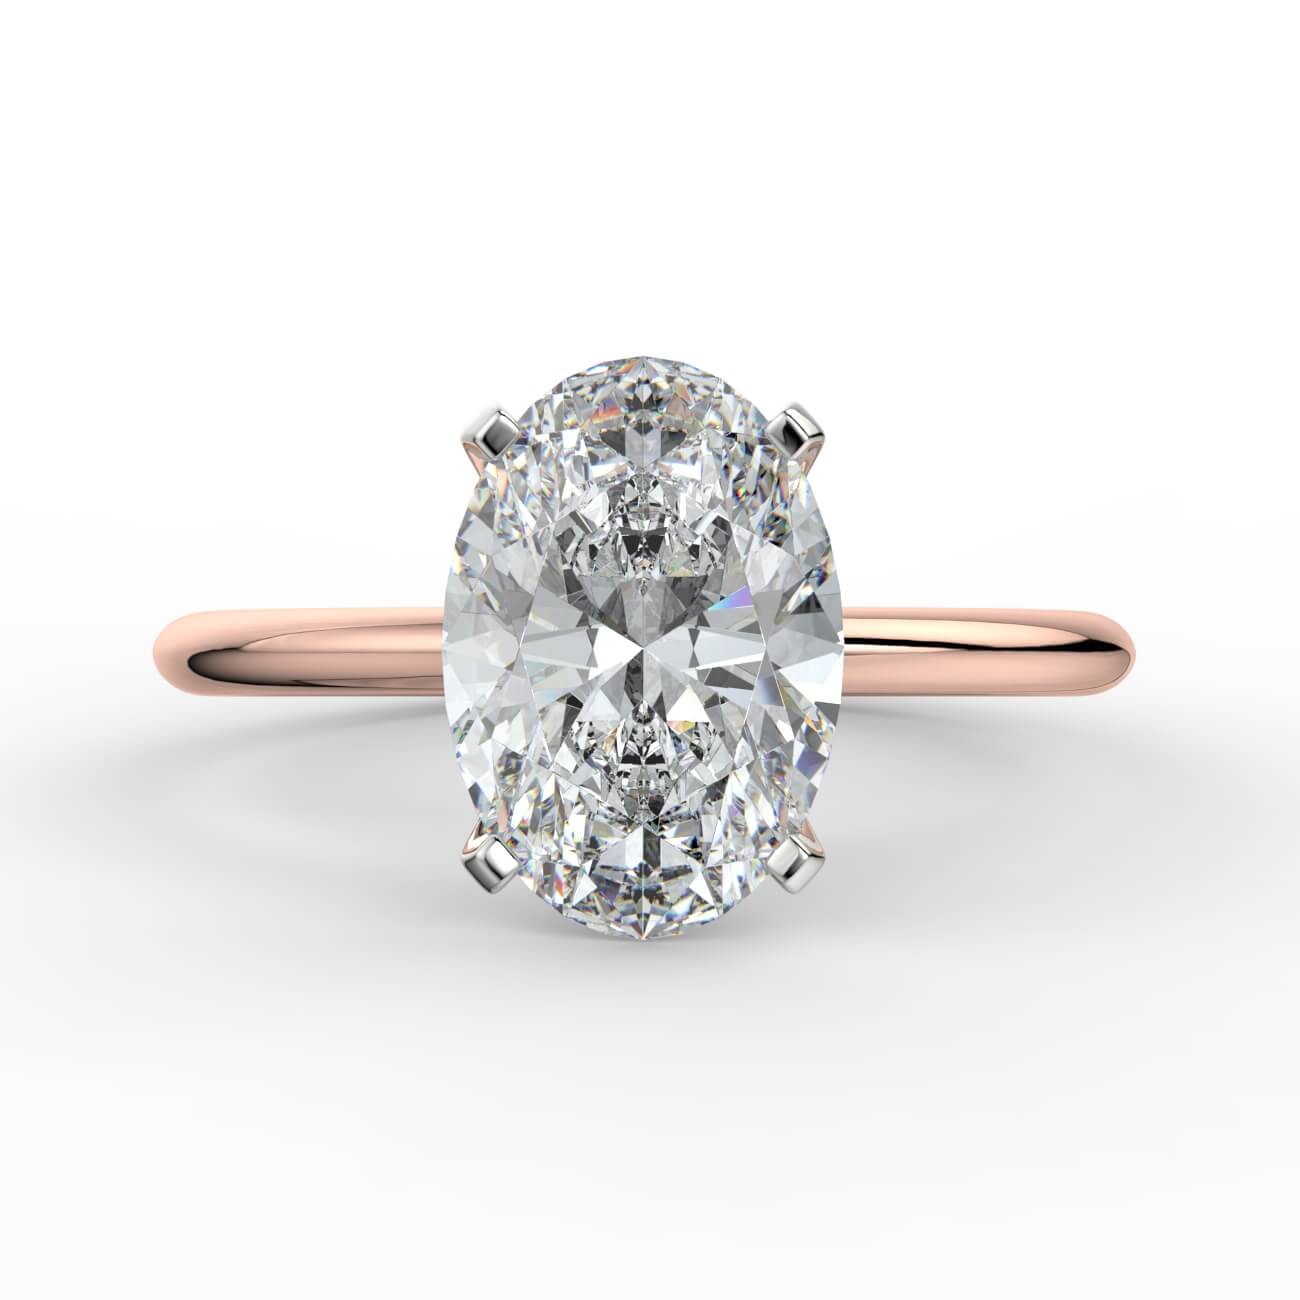 oval shape diamond solitaire ring in white and rose gold - Australian Diamond Network